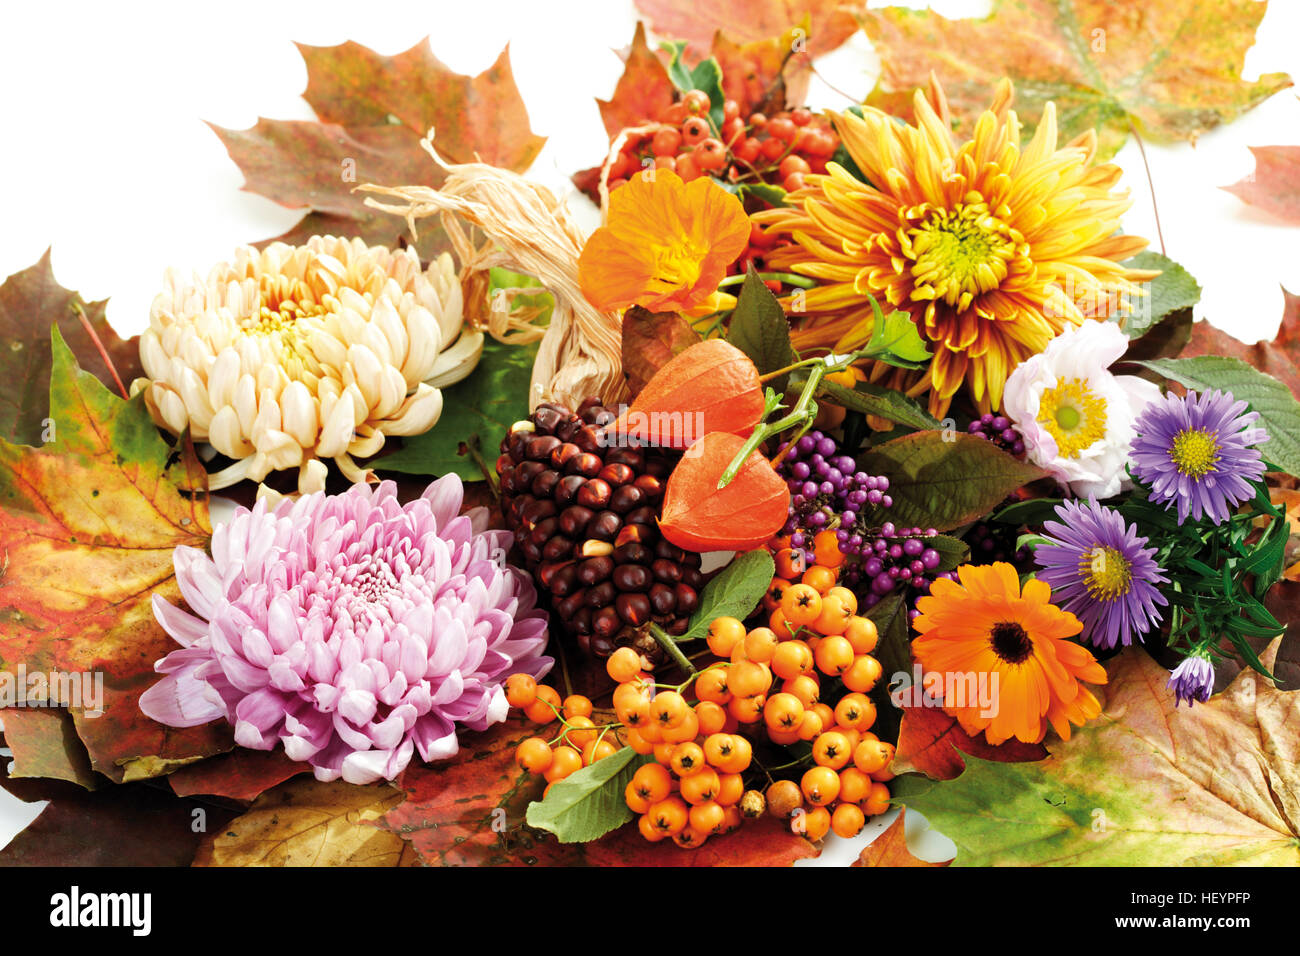 Autumn decoration: firethorn berries, beautyberries, chrysanthemums, Chinese lanterns, autumn asters, pot marigolds and Stock Photo